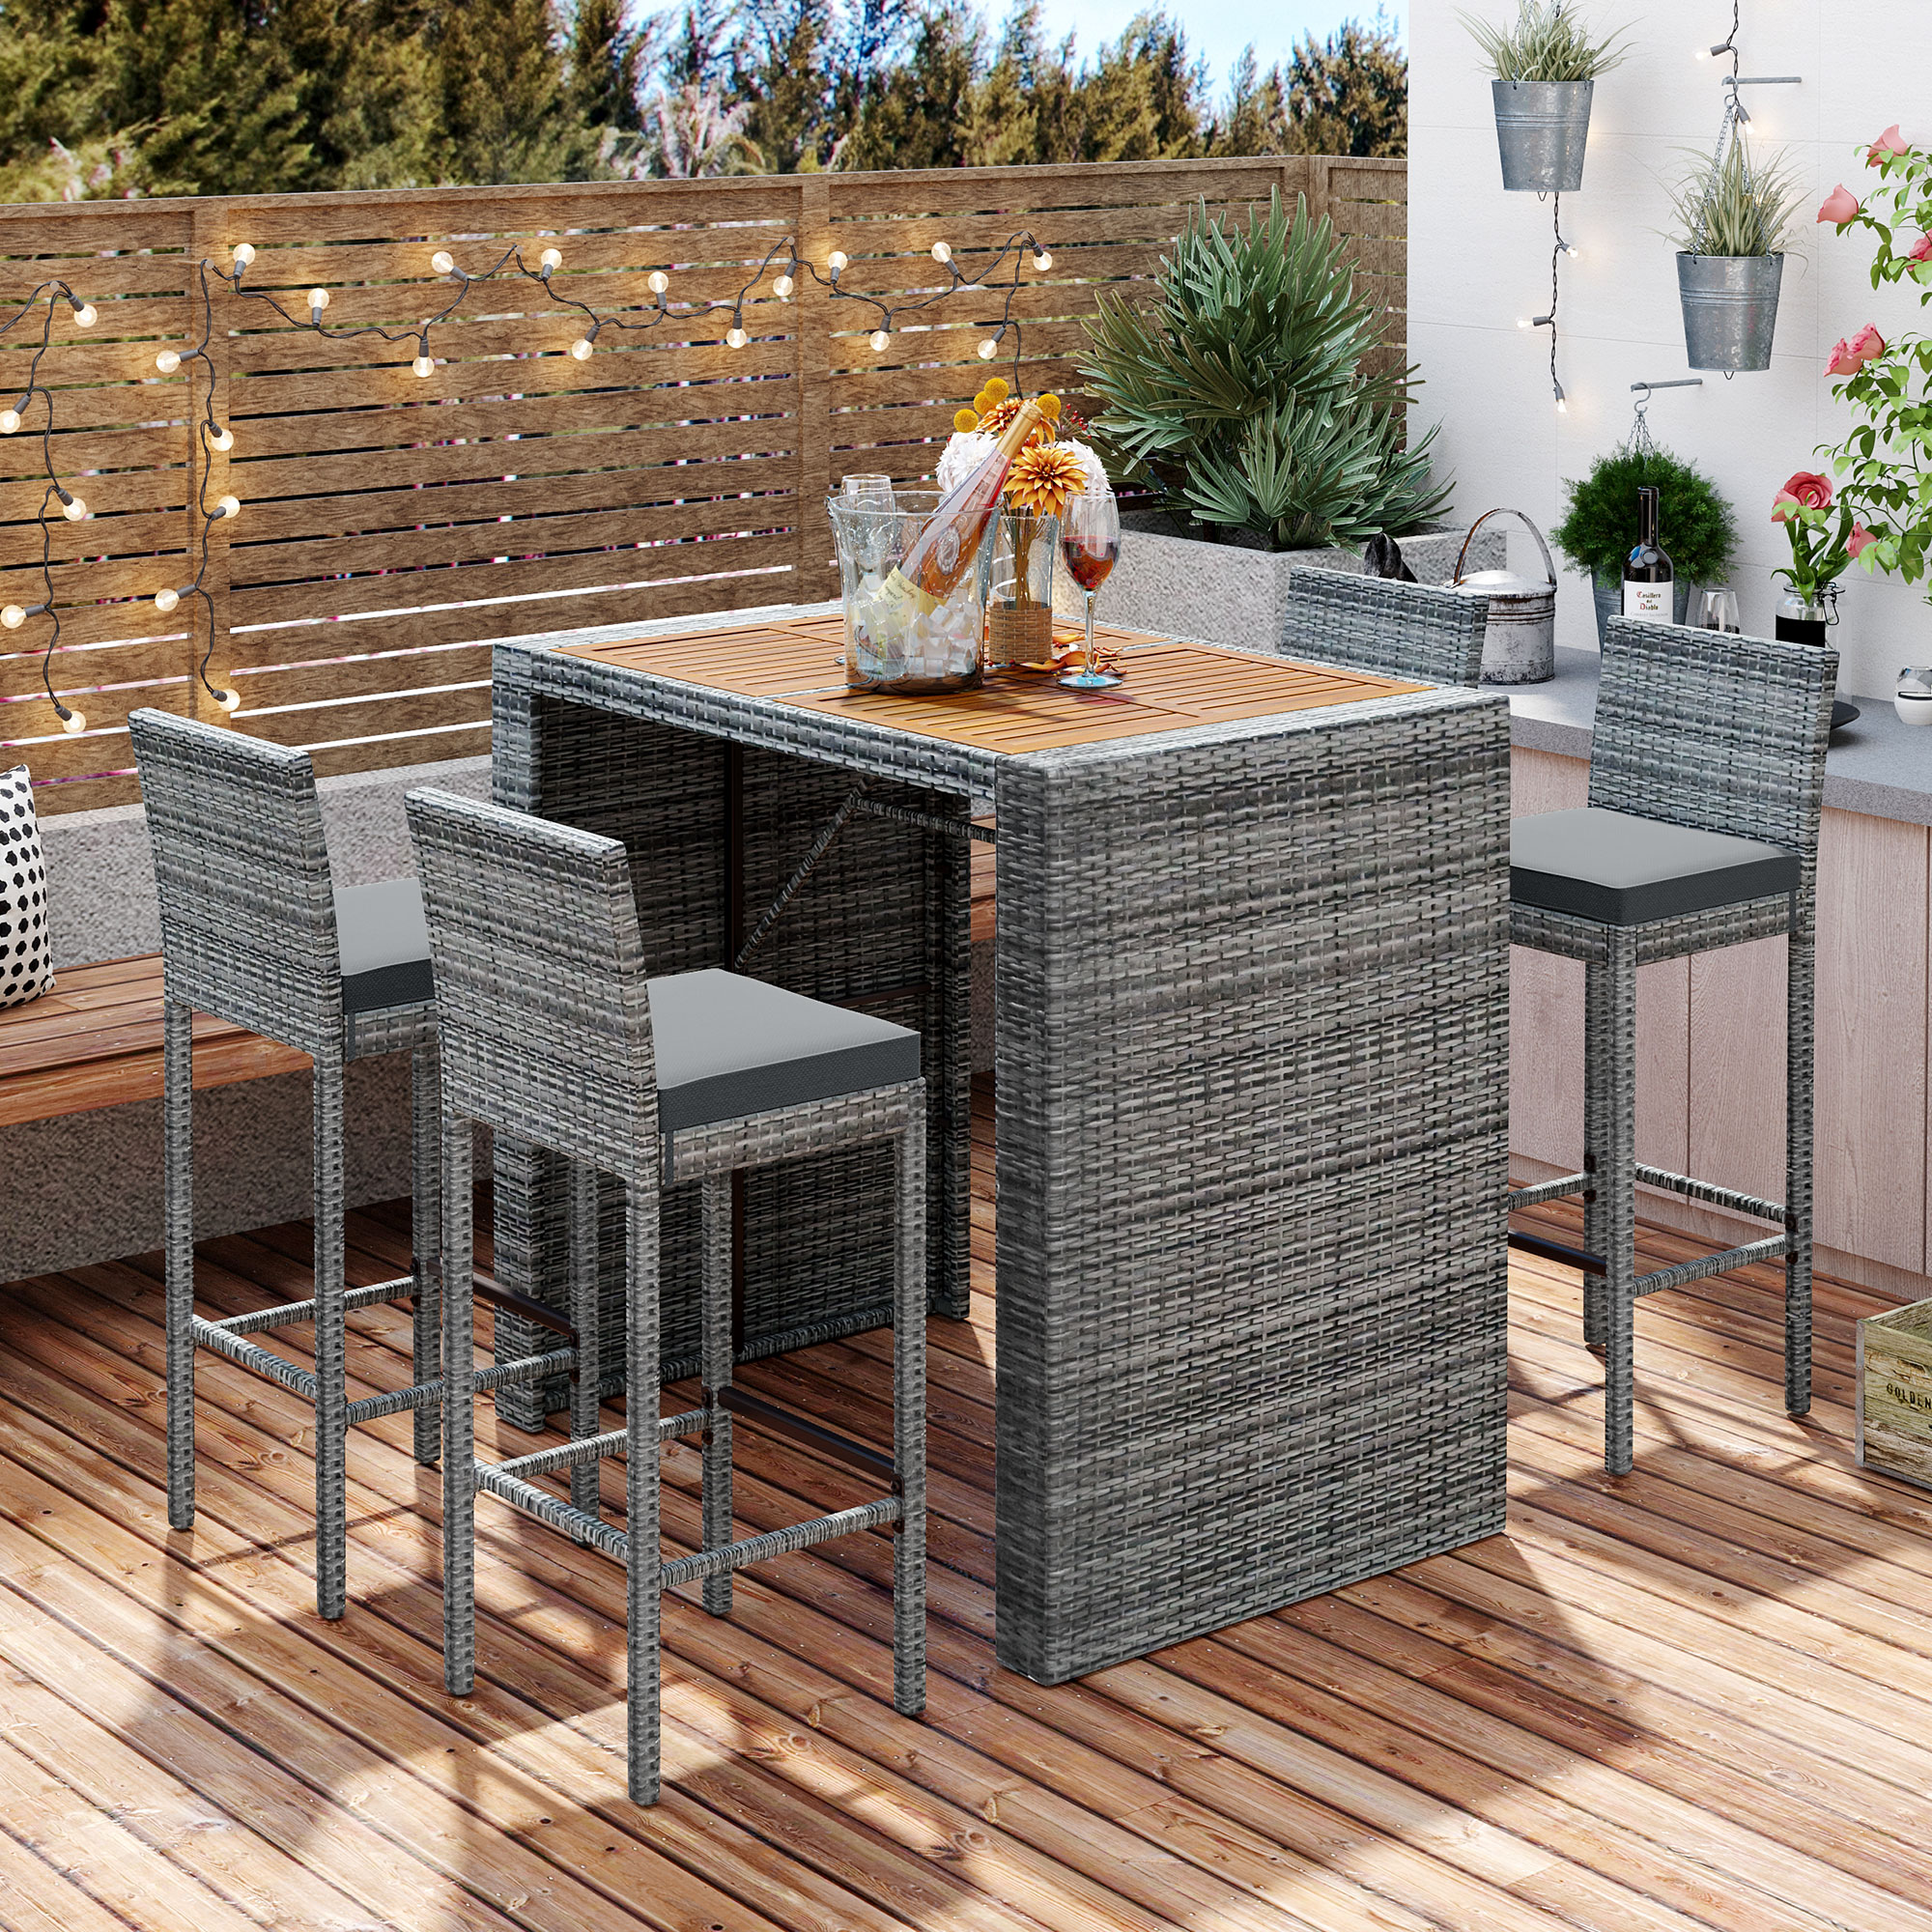 5-pieces Outdoor Patio Wicker Bar Set, Bar Height Chairs With Feet And Fixed Rope, Removable Cushion, Acacia Wood Table , Brown Wood And Gray Wicker - image 2 of 10